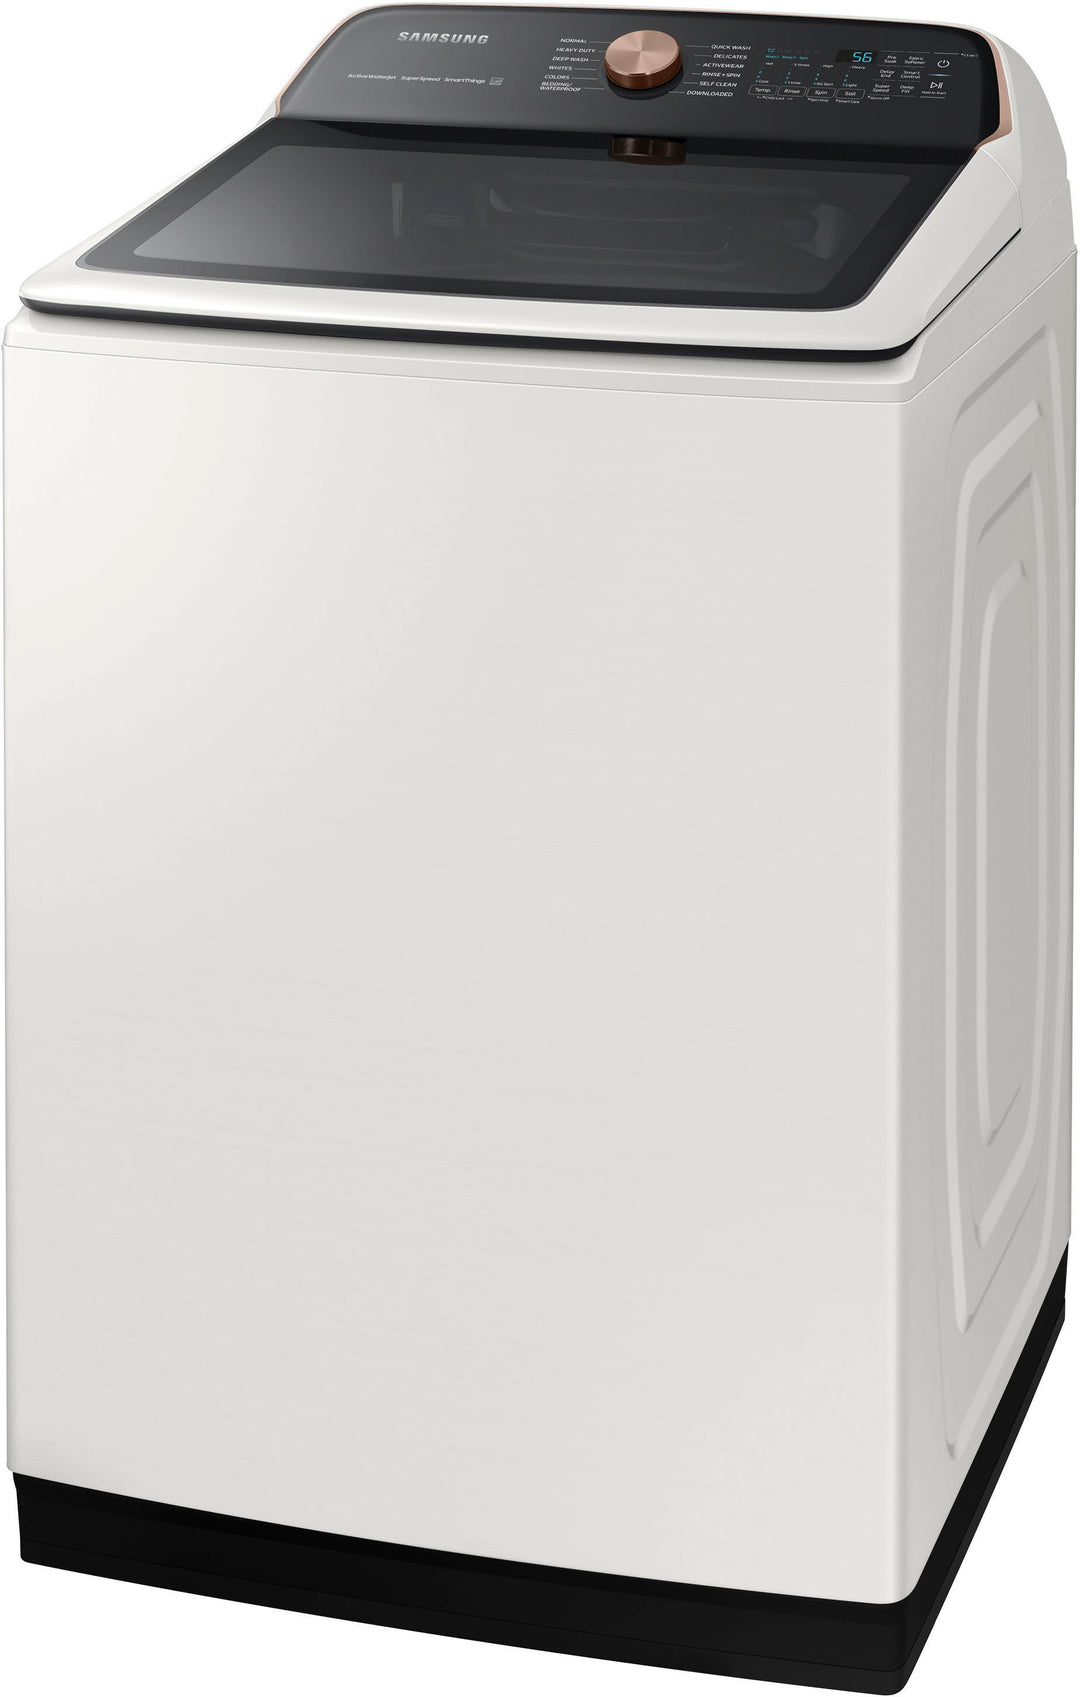 Samsung - 5.5 cu. ft. Extra-Large Capacity Smart Top Load Washer with Super Speed Wash - Ivory_7